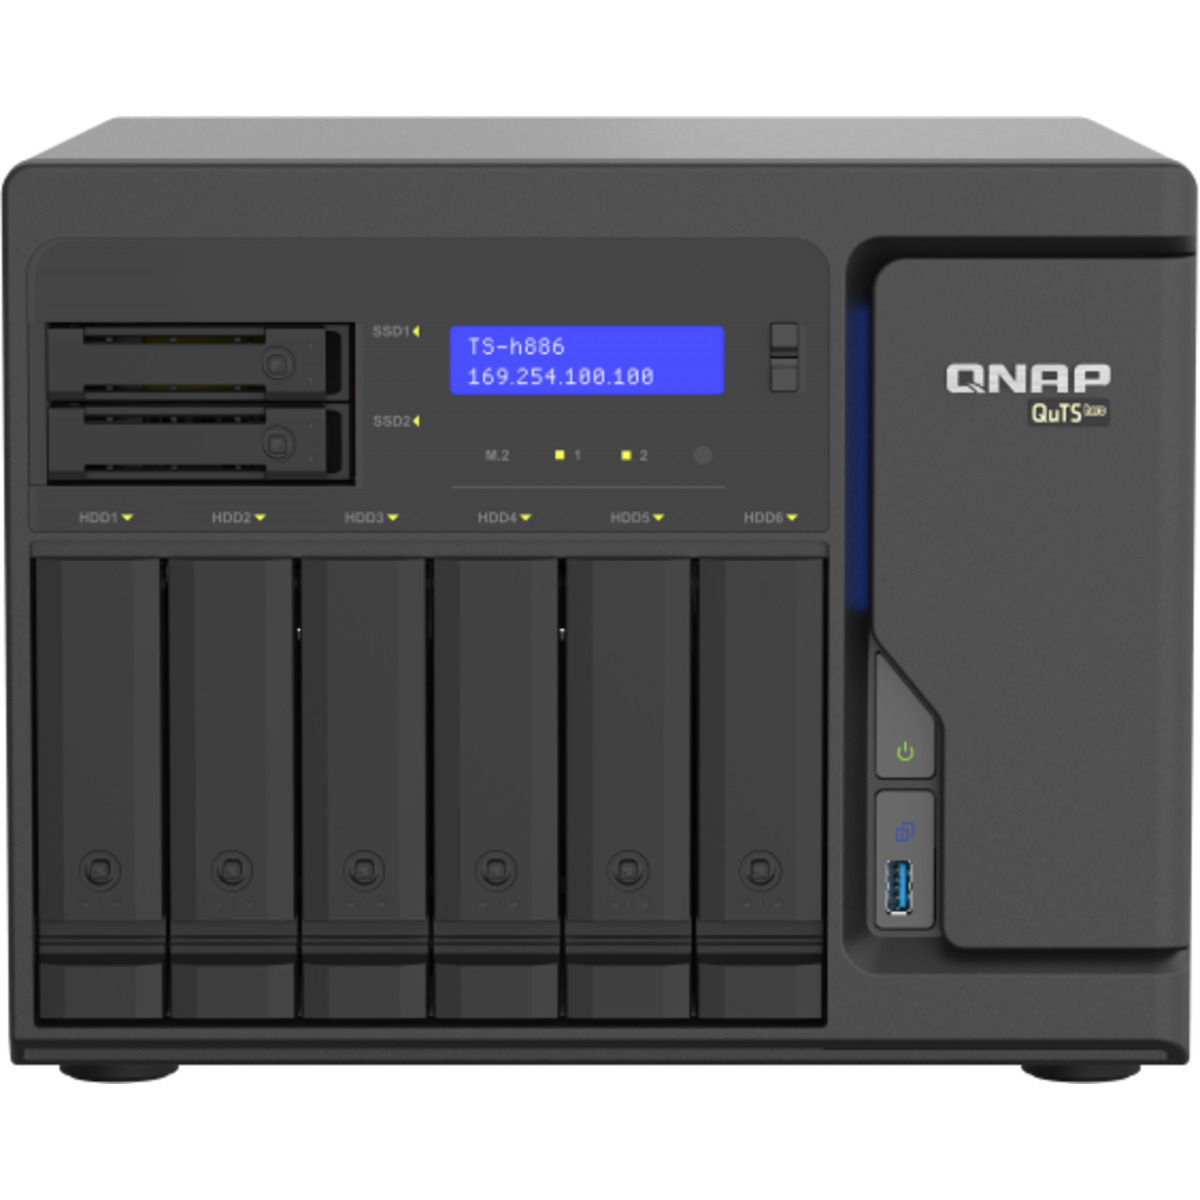 QNAP TS-h886 QuTS hero NAS 16tb 6+2-Bay Desktop Large Business / Enterprise NAS - Network Attached Storage Device 4x4tb Sandisk Ultra 3D SDSSDH3-4T00 2.5 560/520MB/s SATA 6Gb/s SSD CONSUMER Class Drives Installed - Burn-In Tested TS-h886 QuTS hero NAS